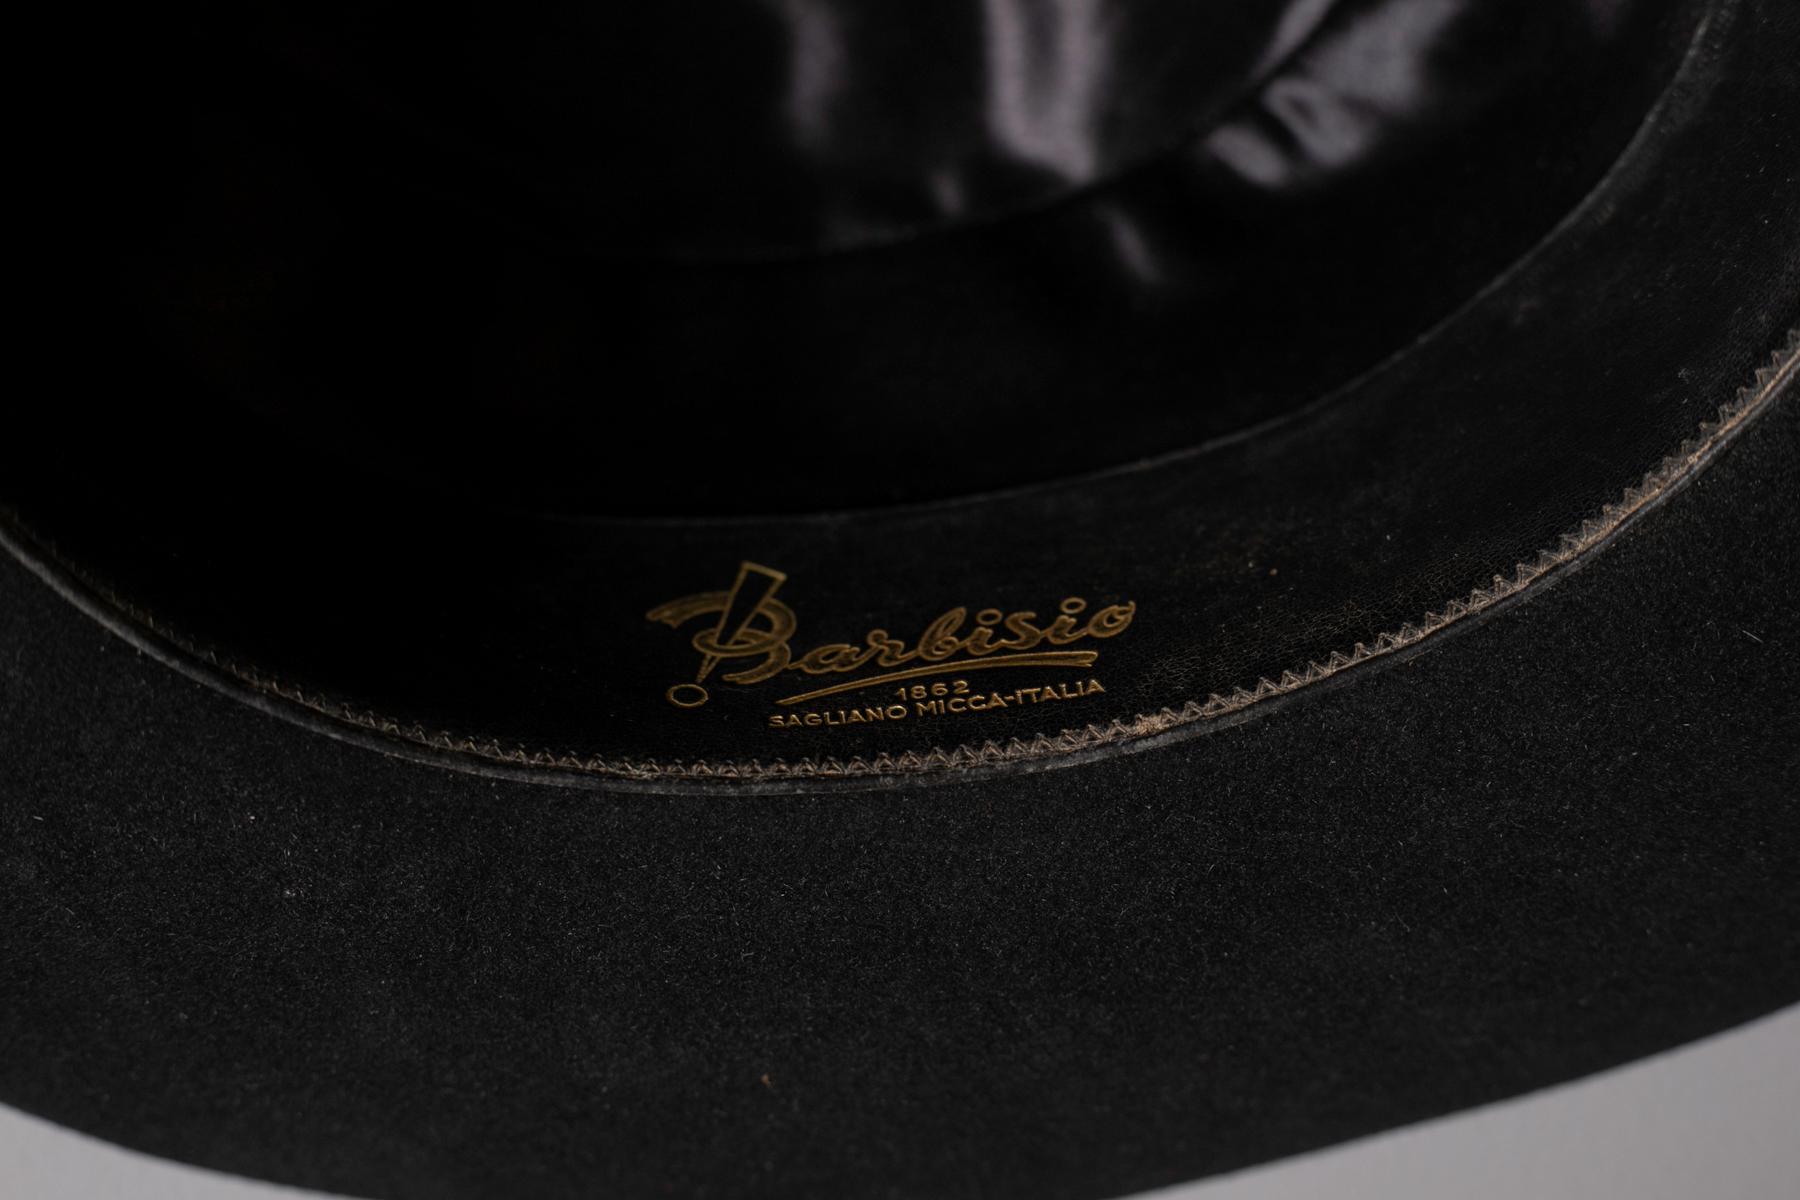 Elegant Vintage Women's Hat of the Italian manufacture Barbisio, 1950s. The hat has an original label inside the hat. Superior quality. The hat is lined with shaved hare felt, silk belt, satin lining. Size 57 numbered 5.
The hat is the perfect